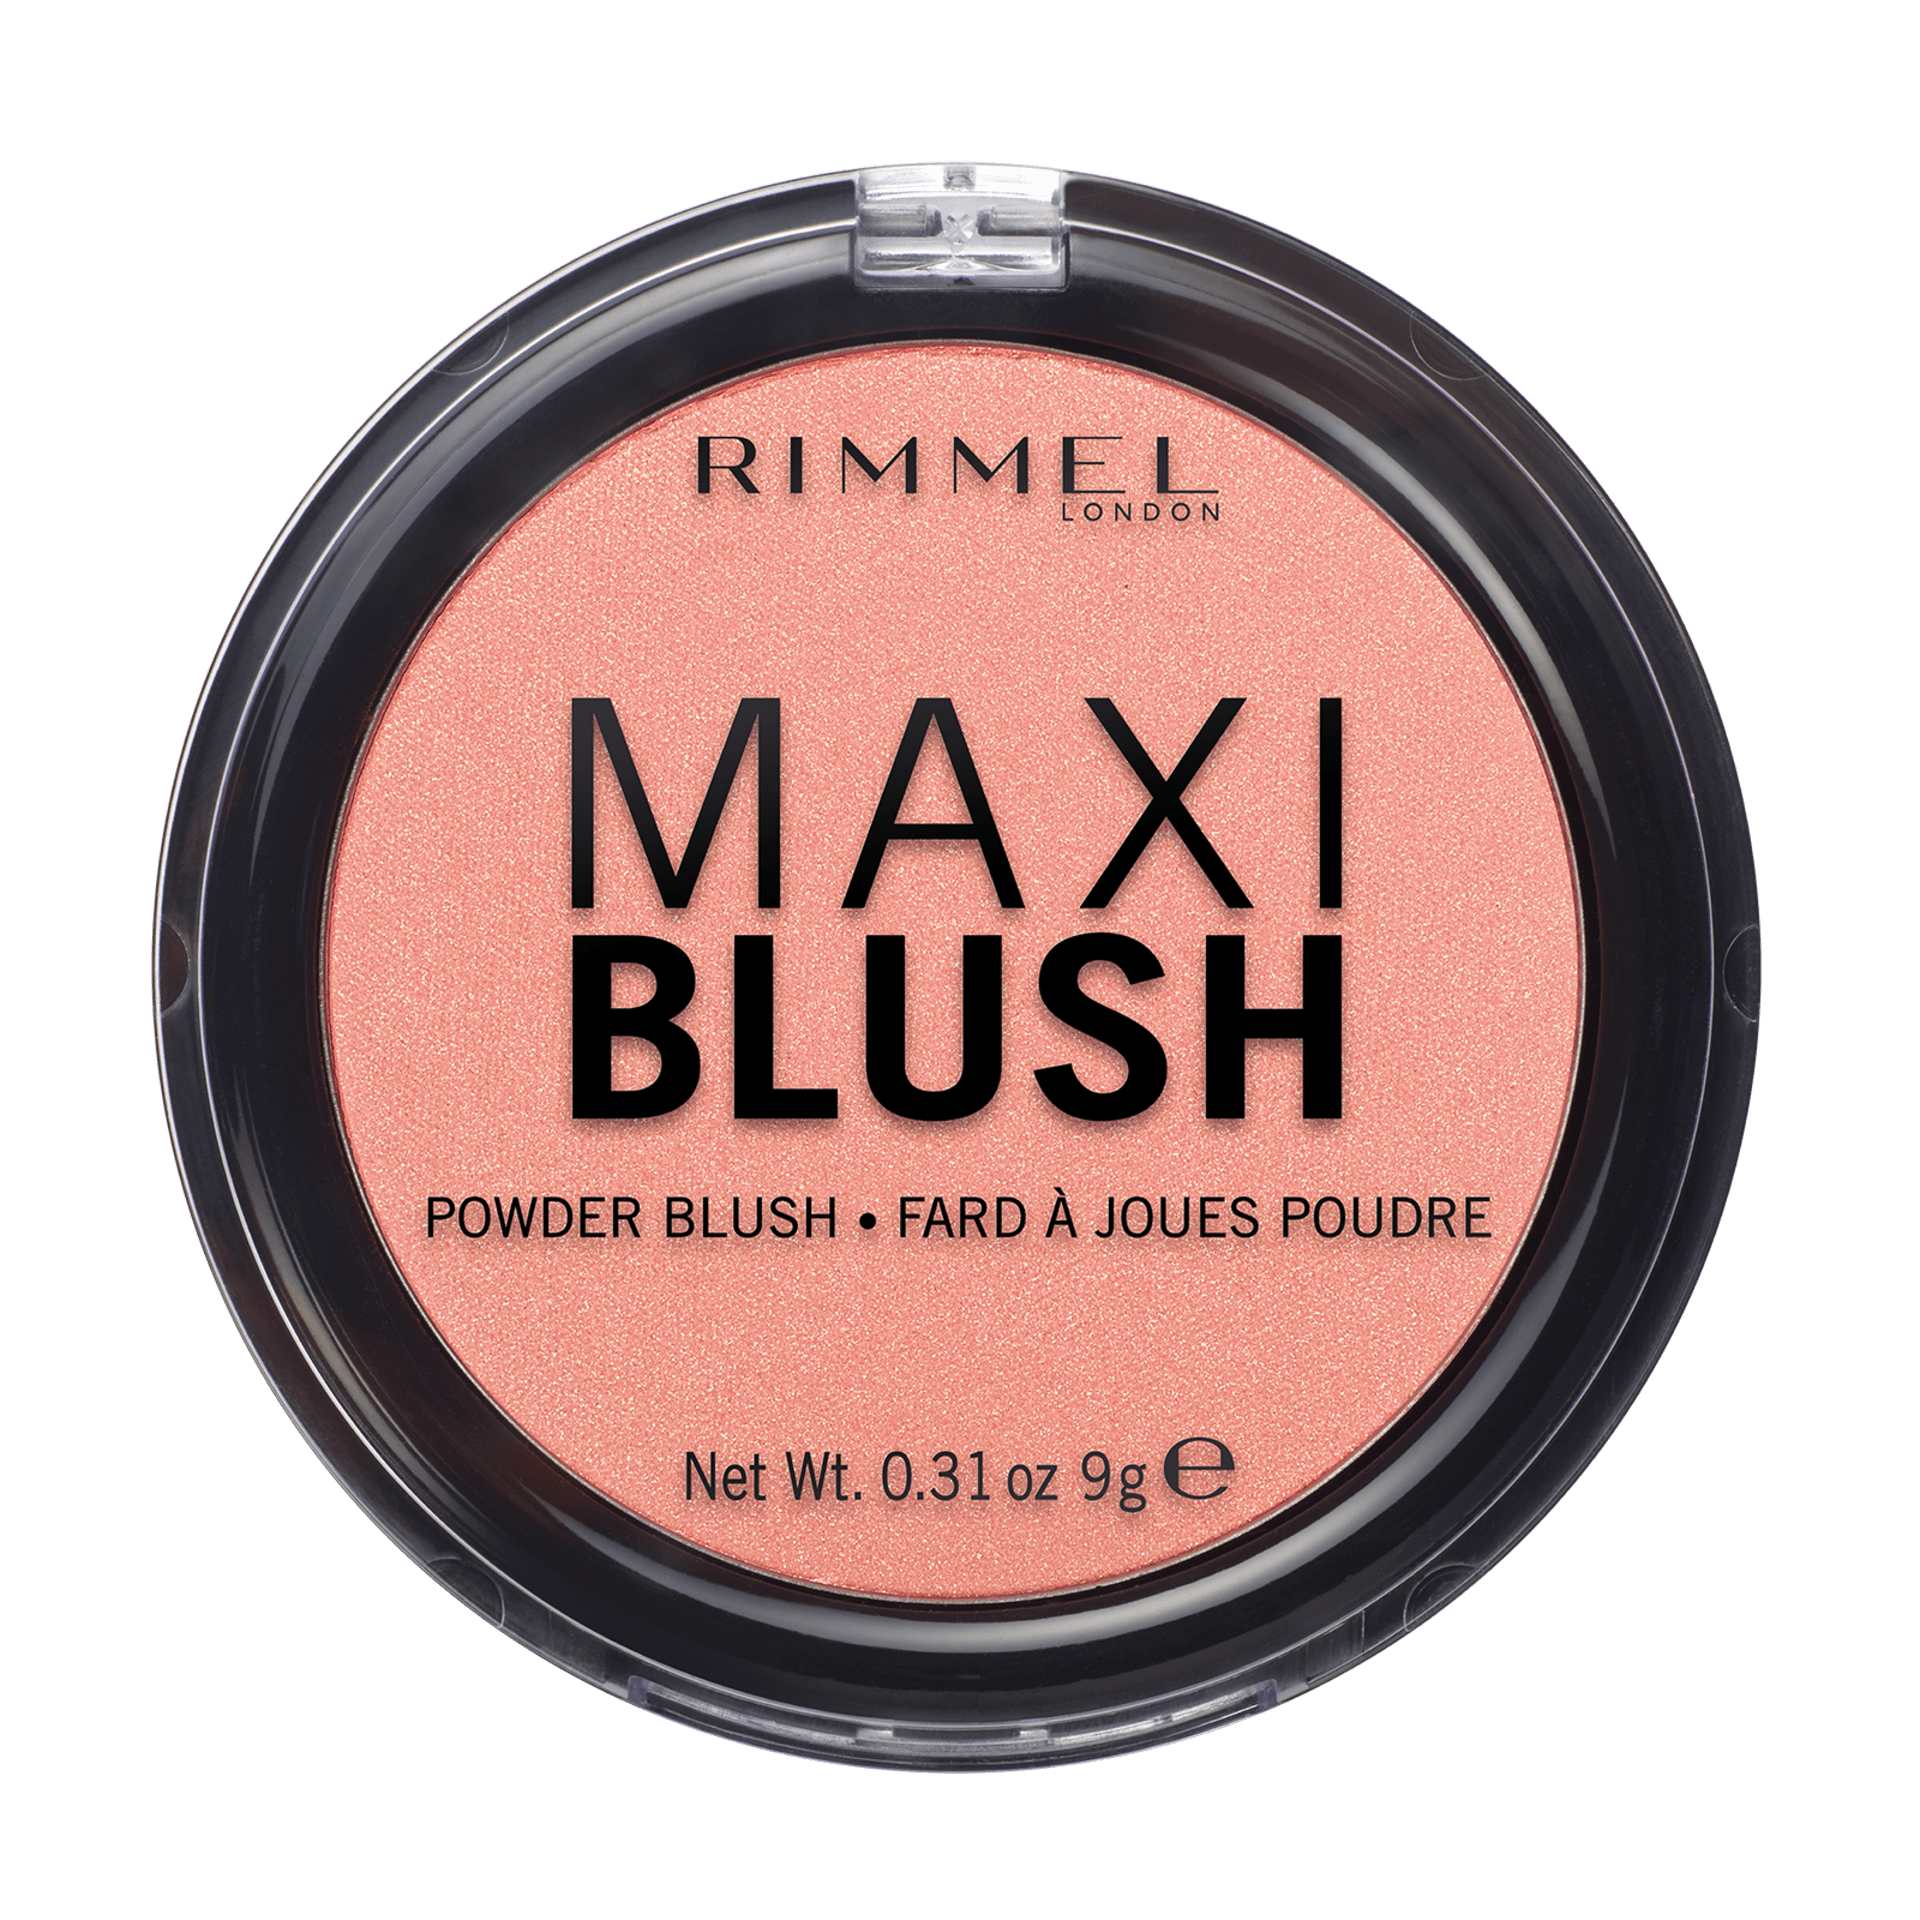 Rimmel 5 in 1 Fix and Perfect Pro Primer Review + Demo on How to